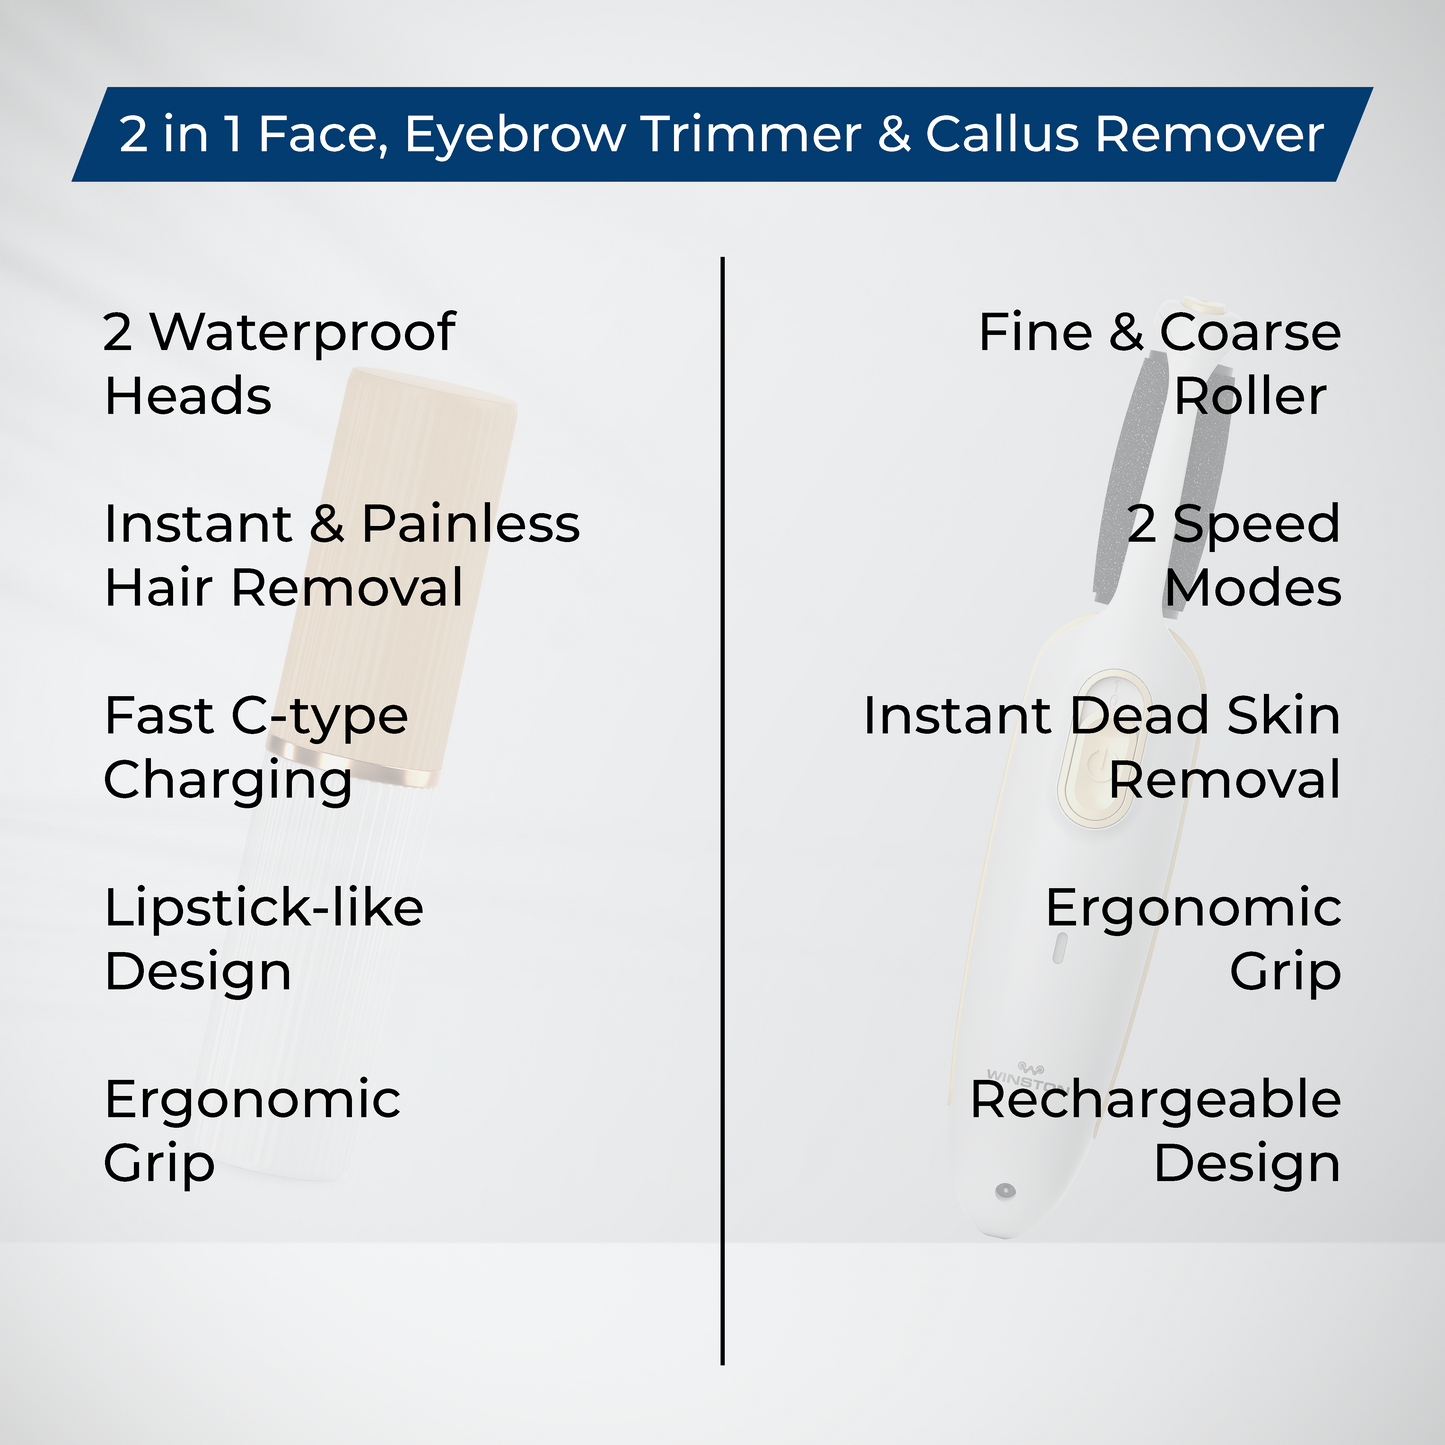 2 in 1 Face, Eyebrow Trimmer & Callus Combo